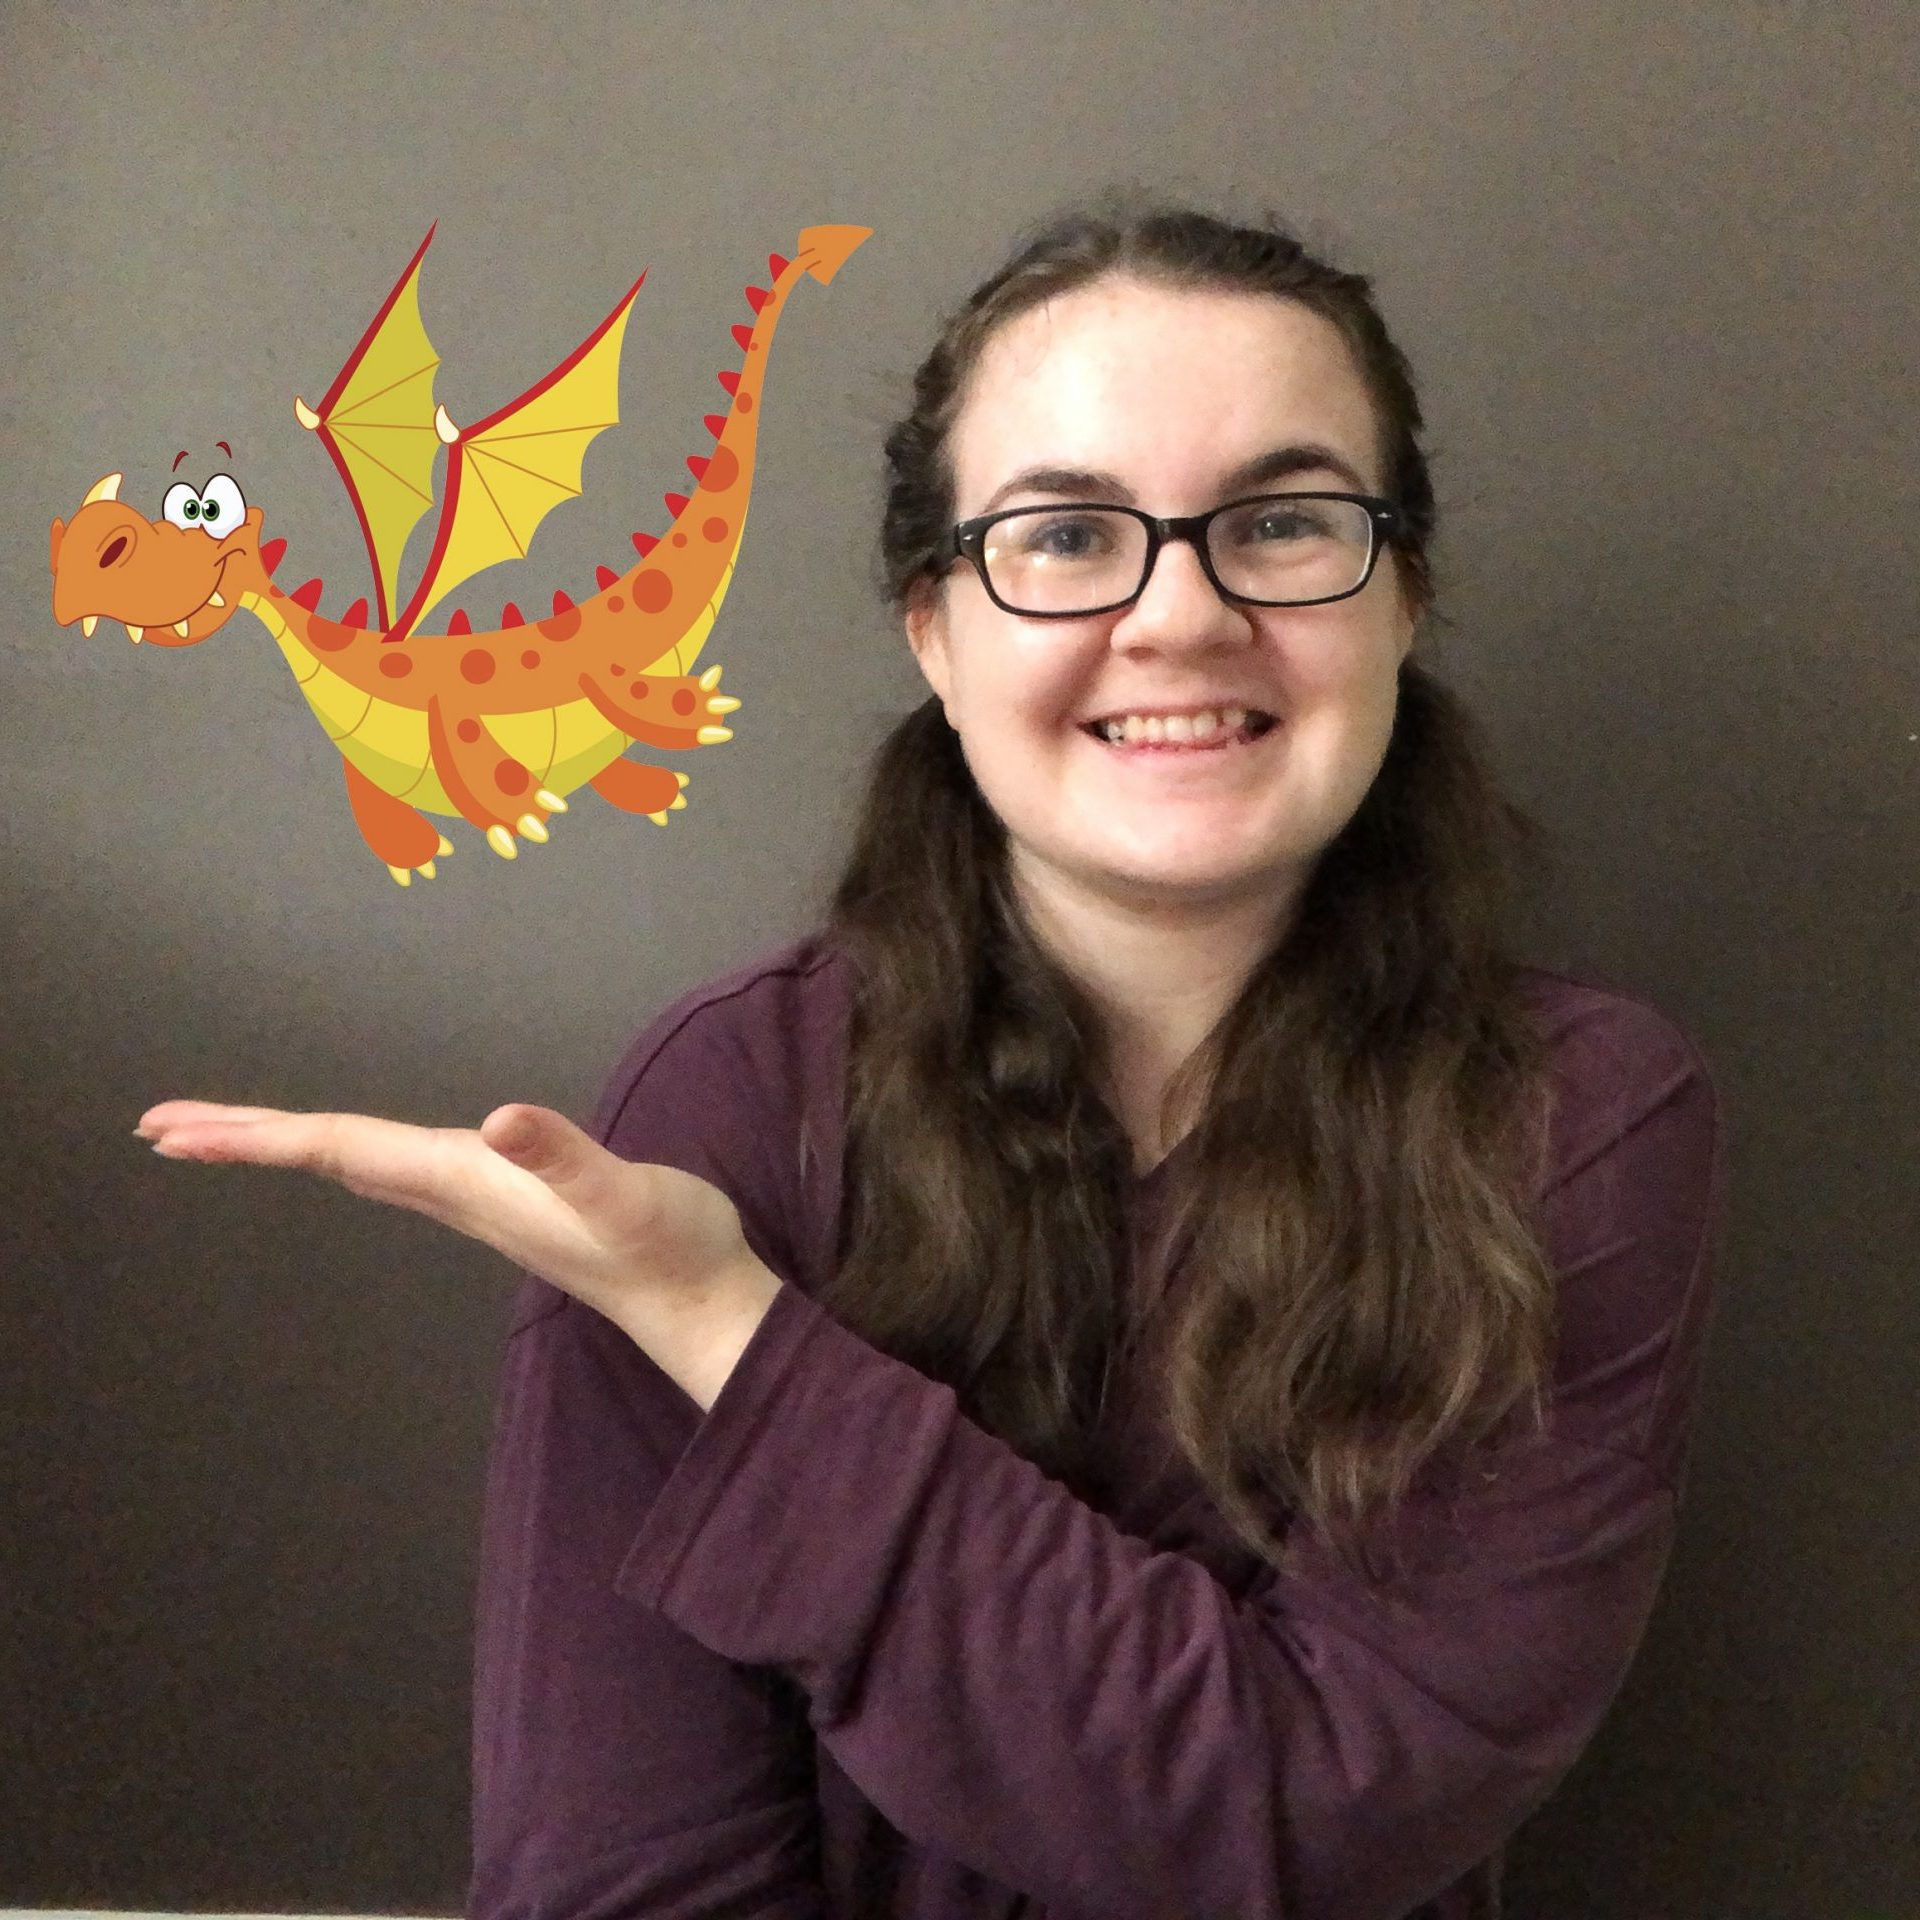 Rhyme Time: Fire Breathing Dragons with Jessica